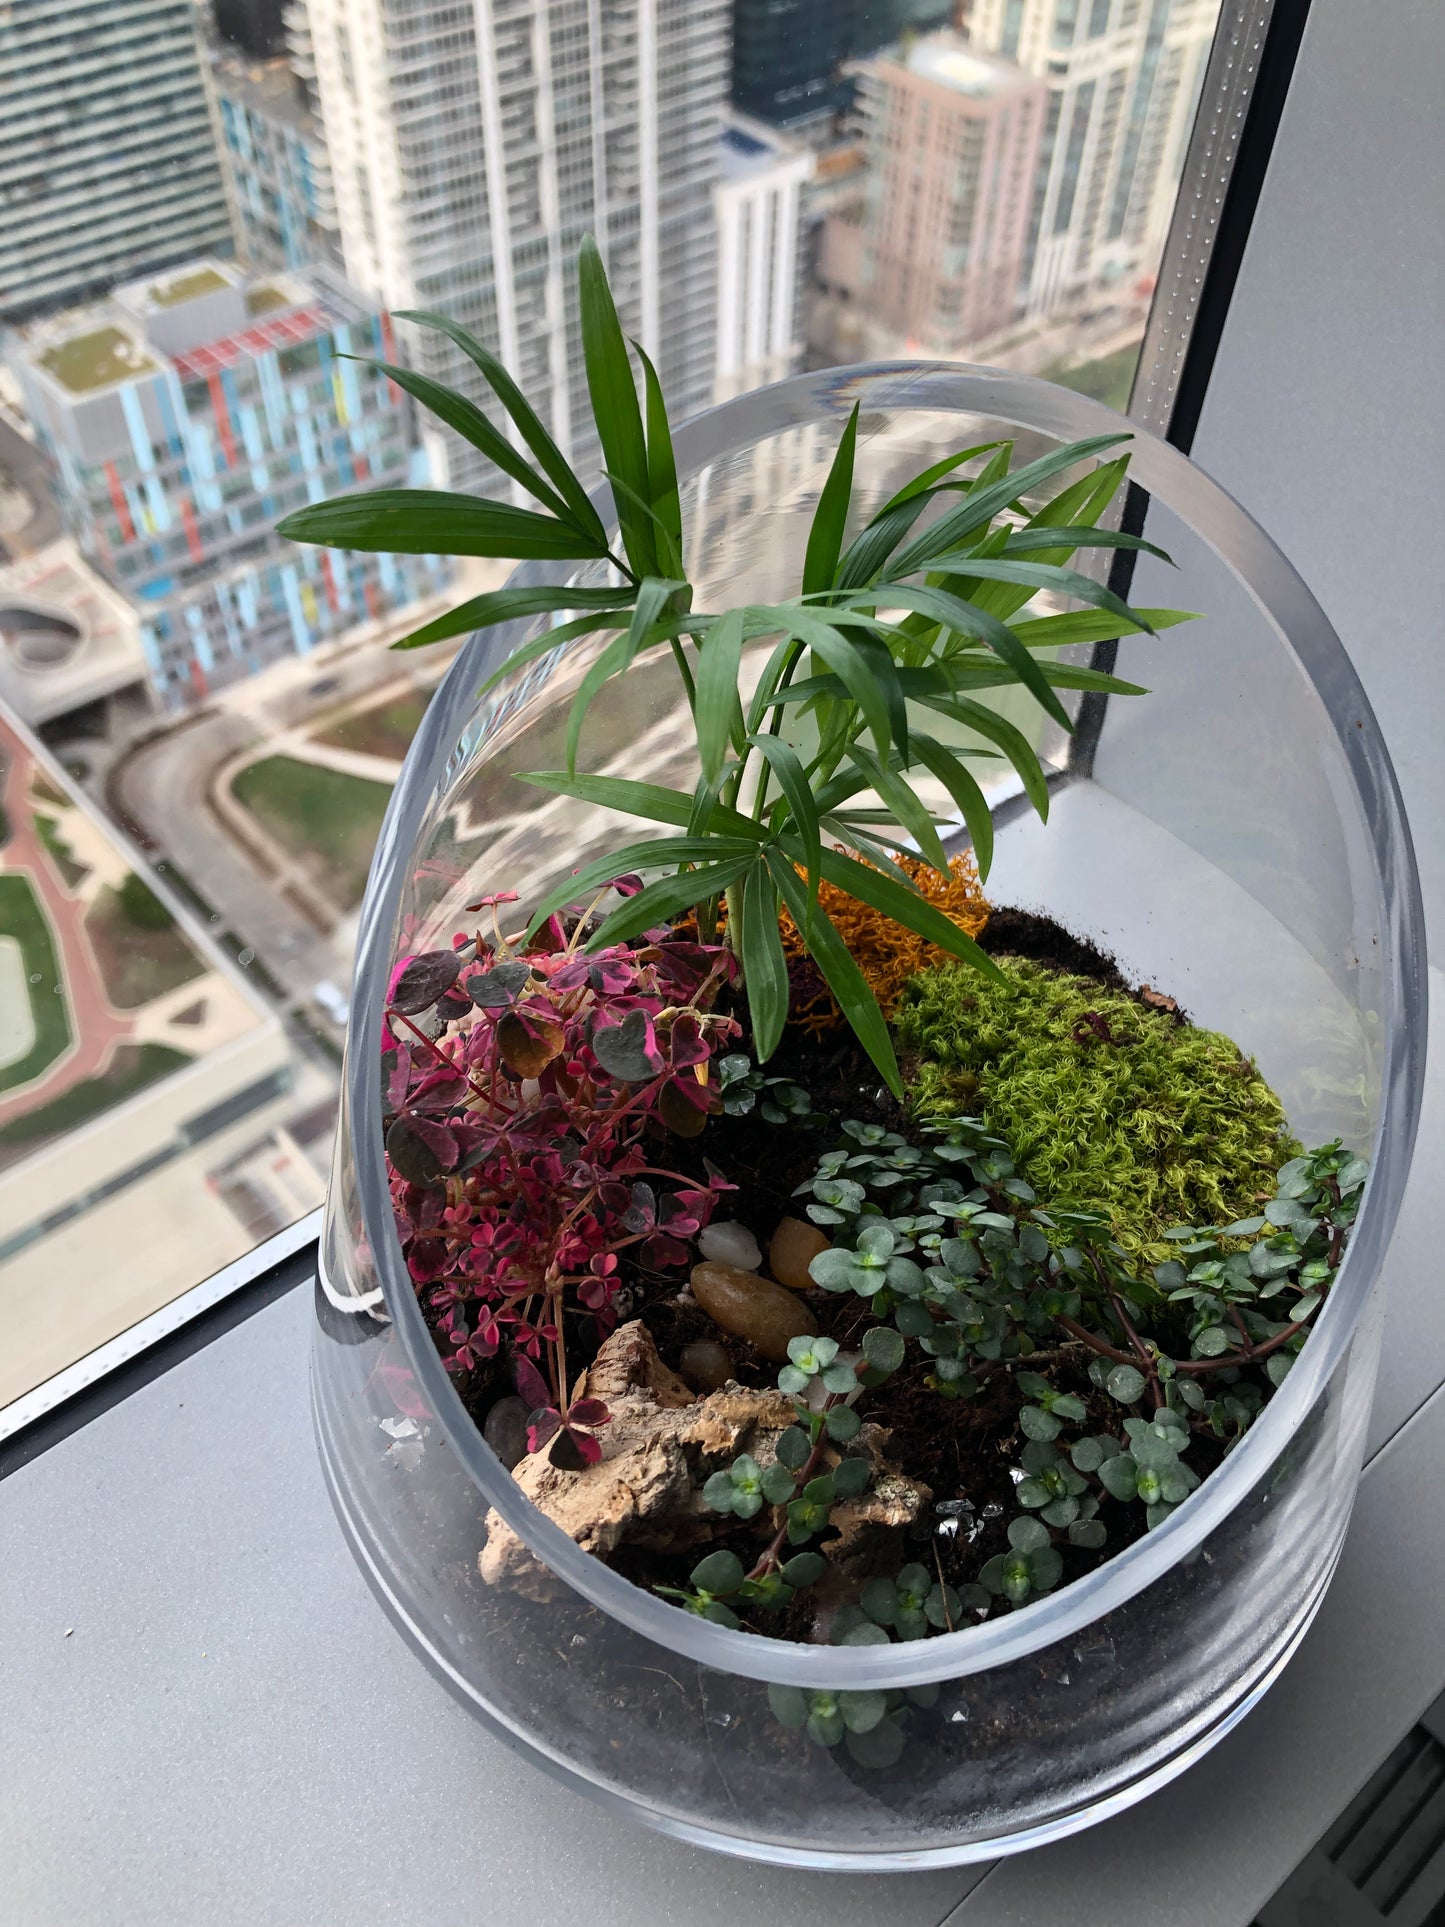 Tropical terrarium with low plants, moss and parlor palm